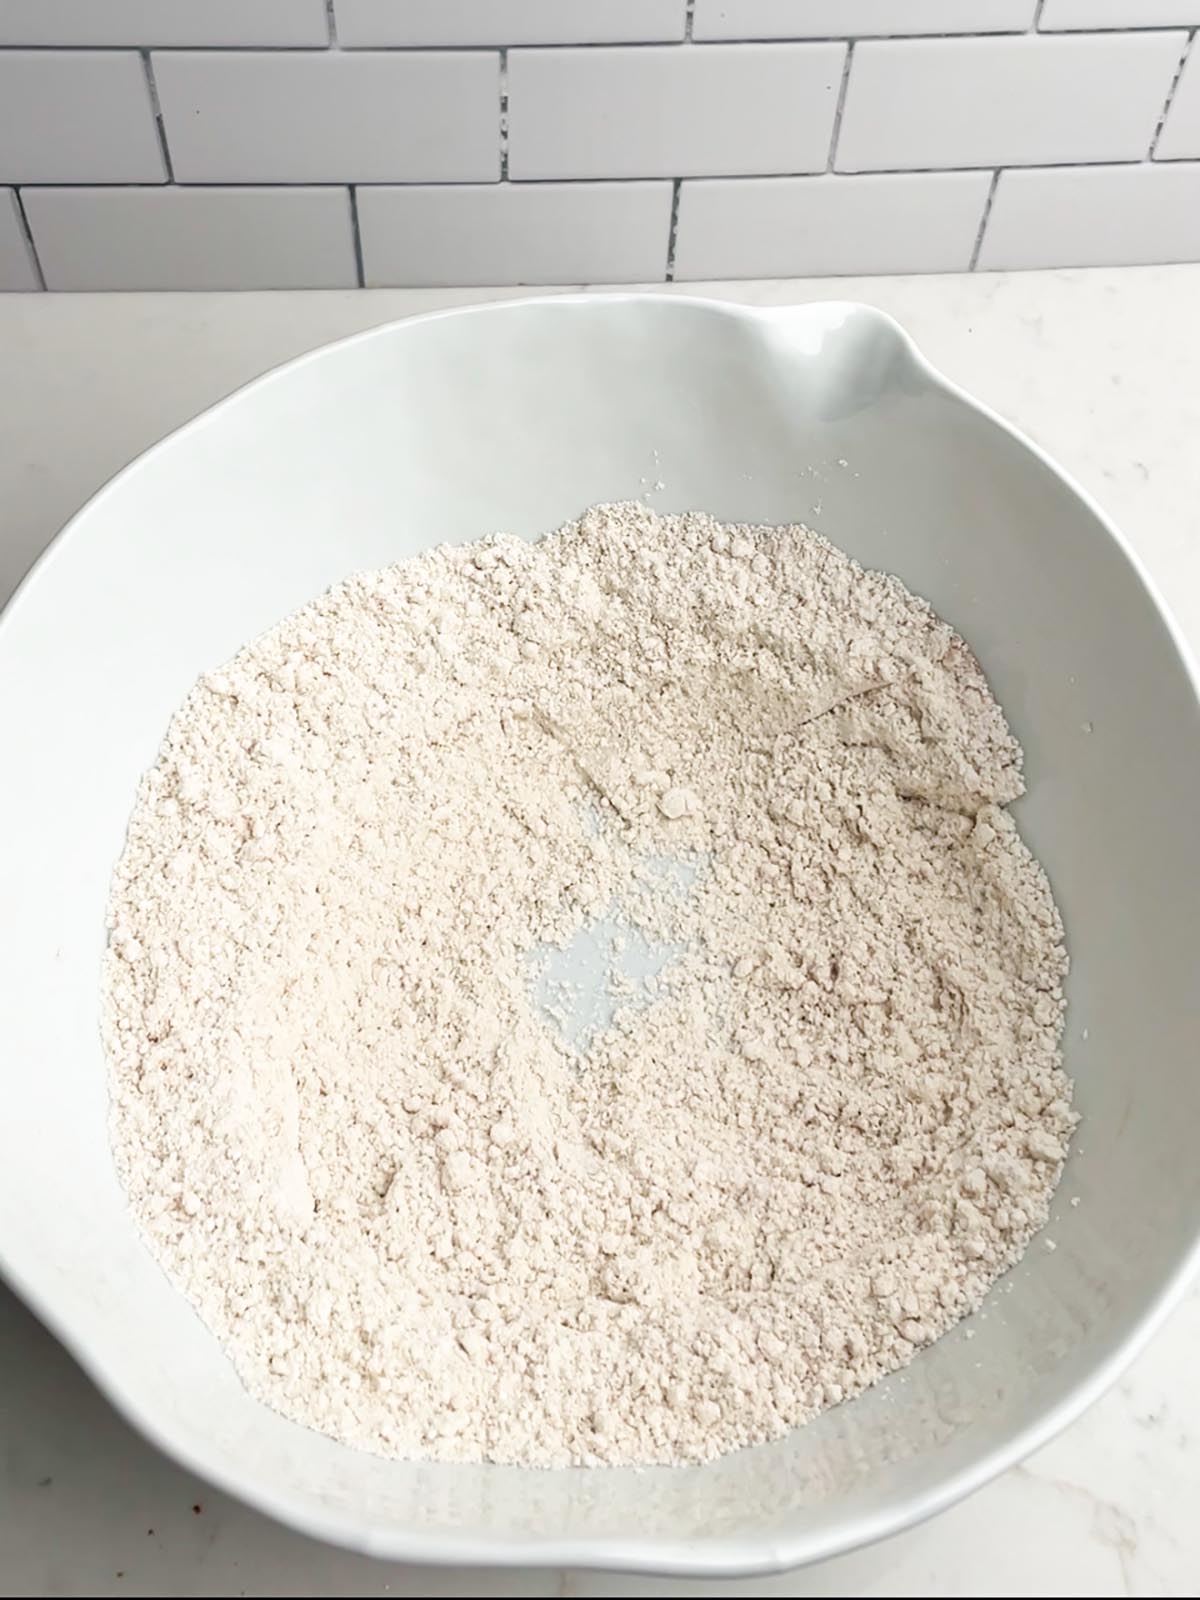 dry ingredients in a white mixing bowl.